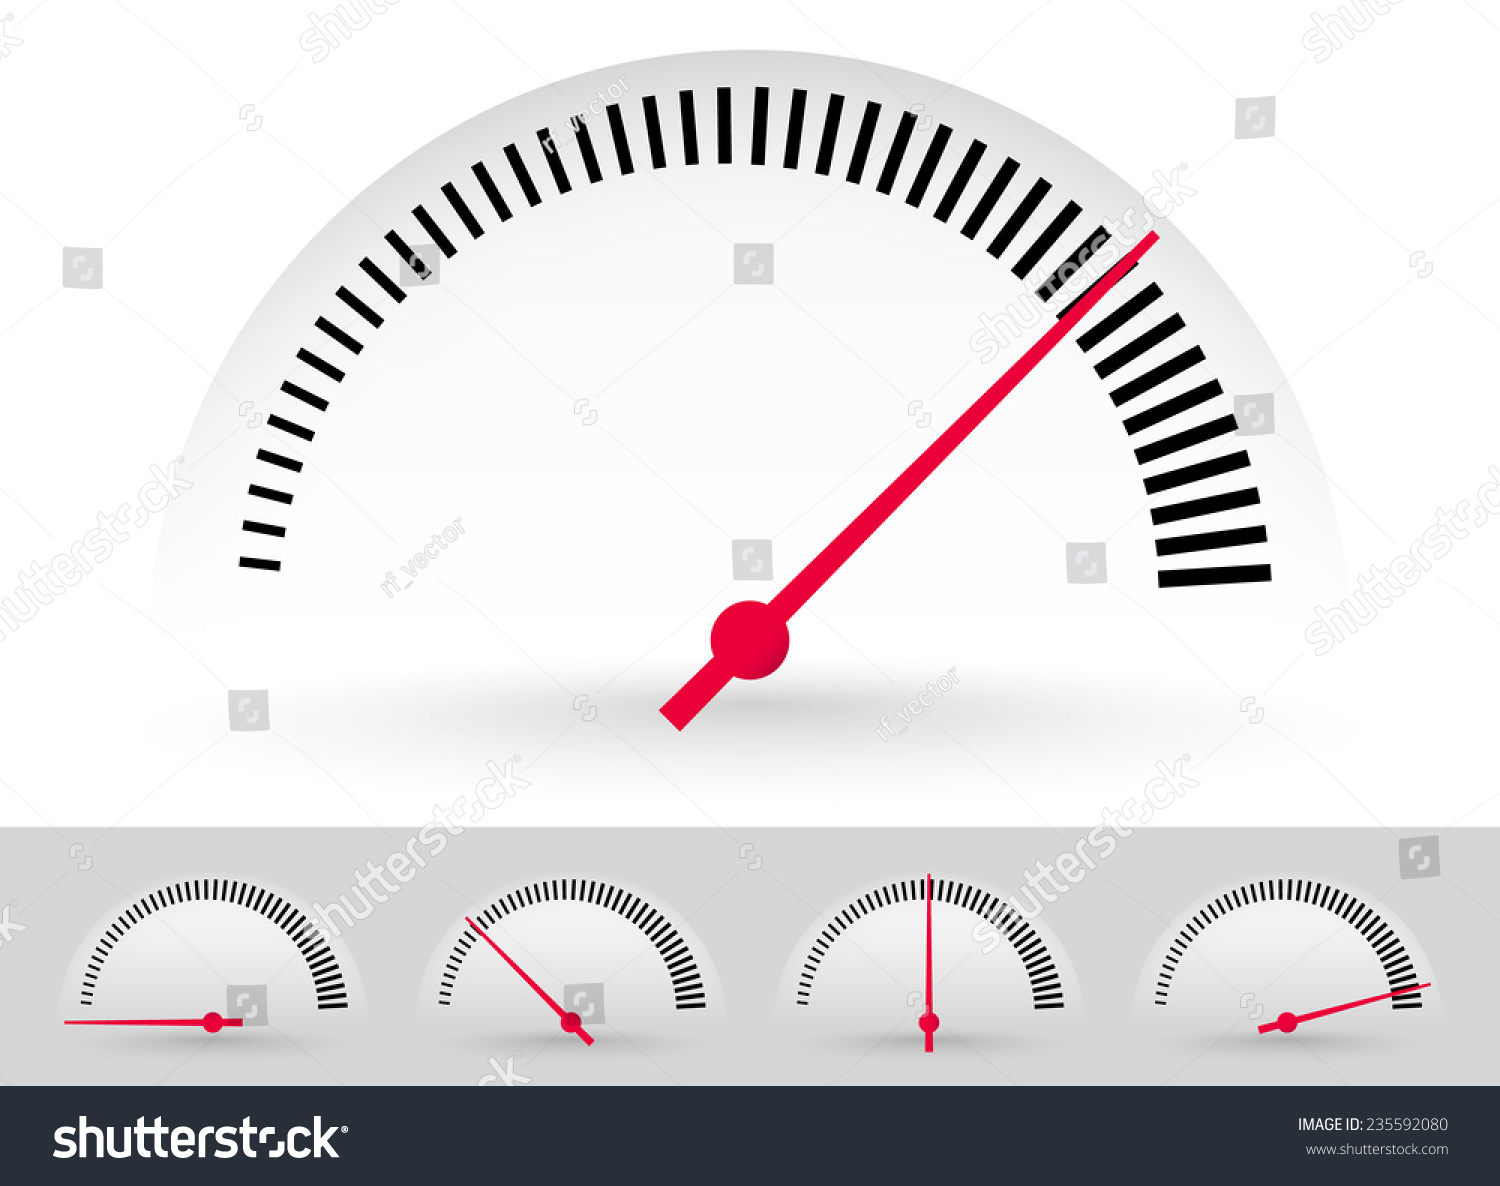 SVG of Dial, meter templates with red needle at 5 stages. Measurement, acceleration or generic level indicator. (eps 10 vector with transparency) svg